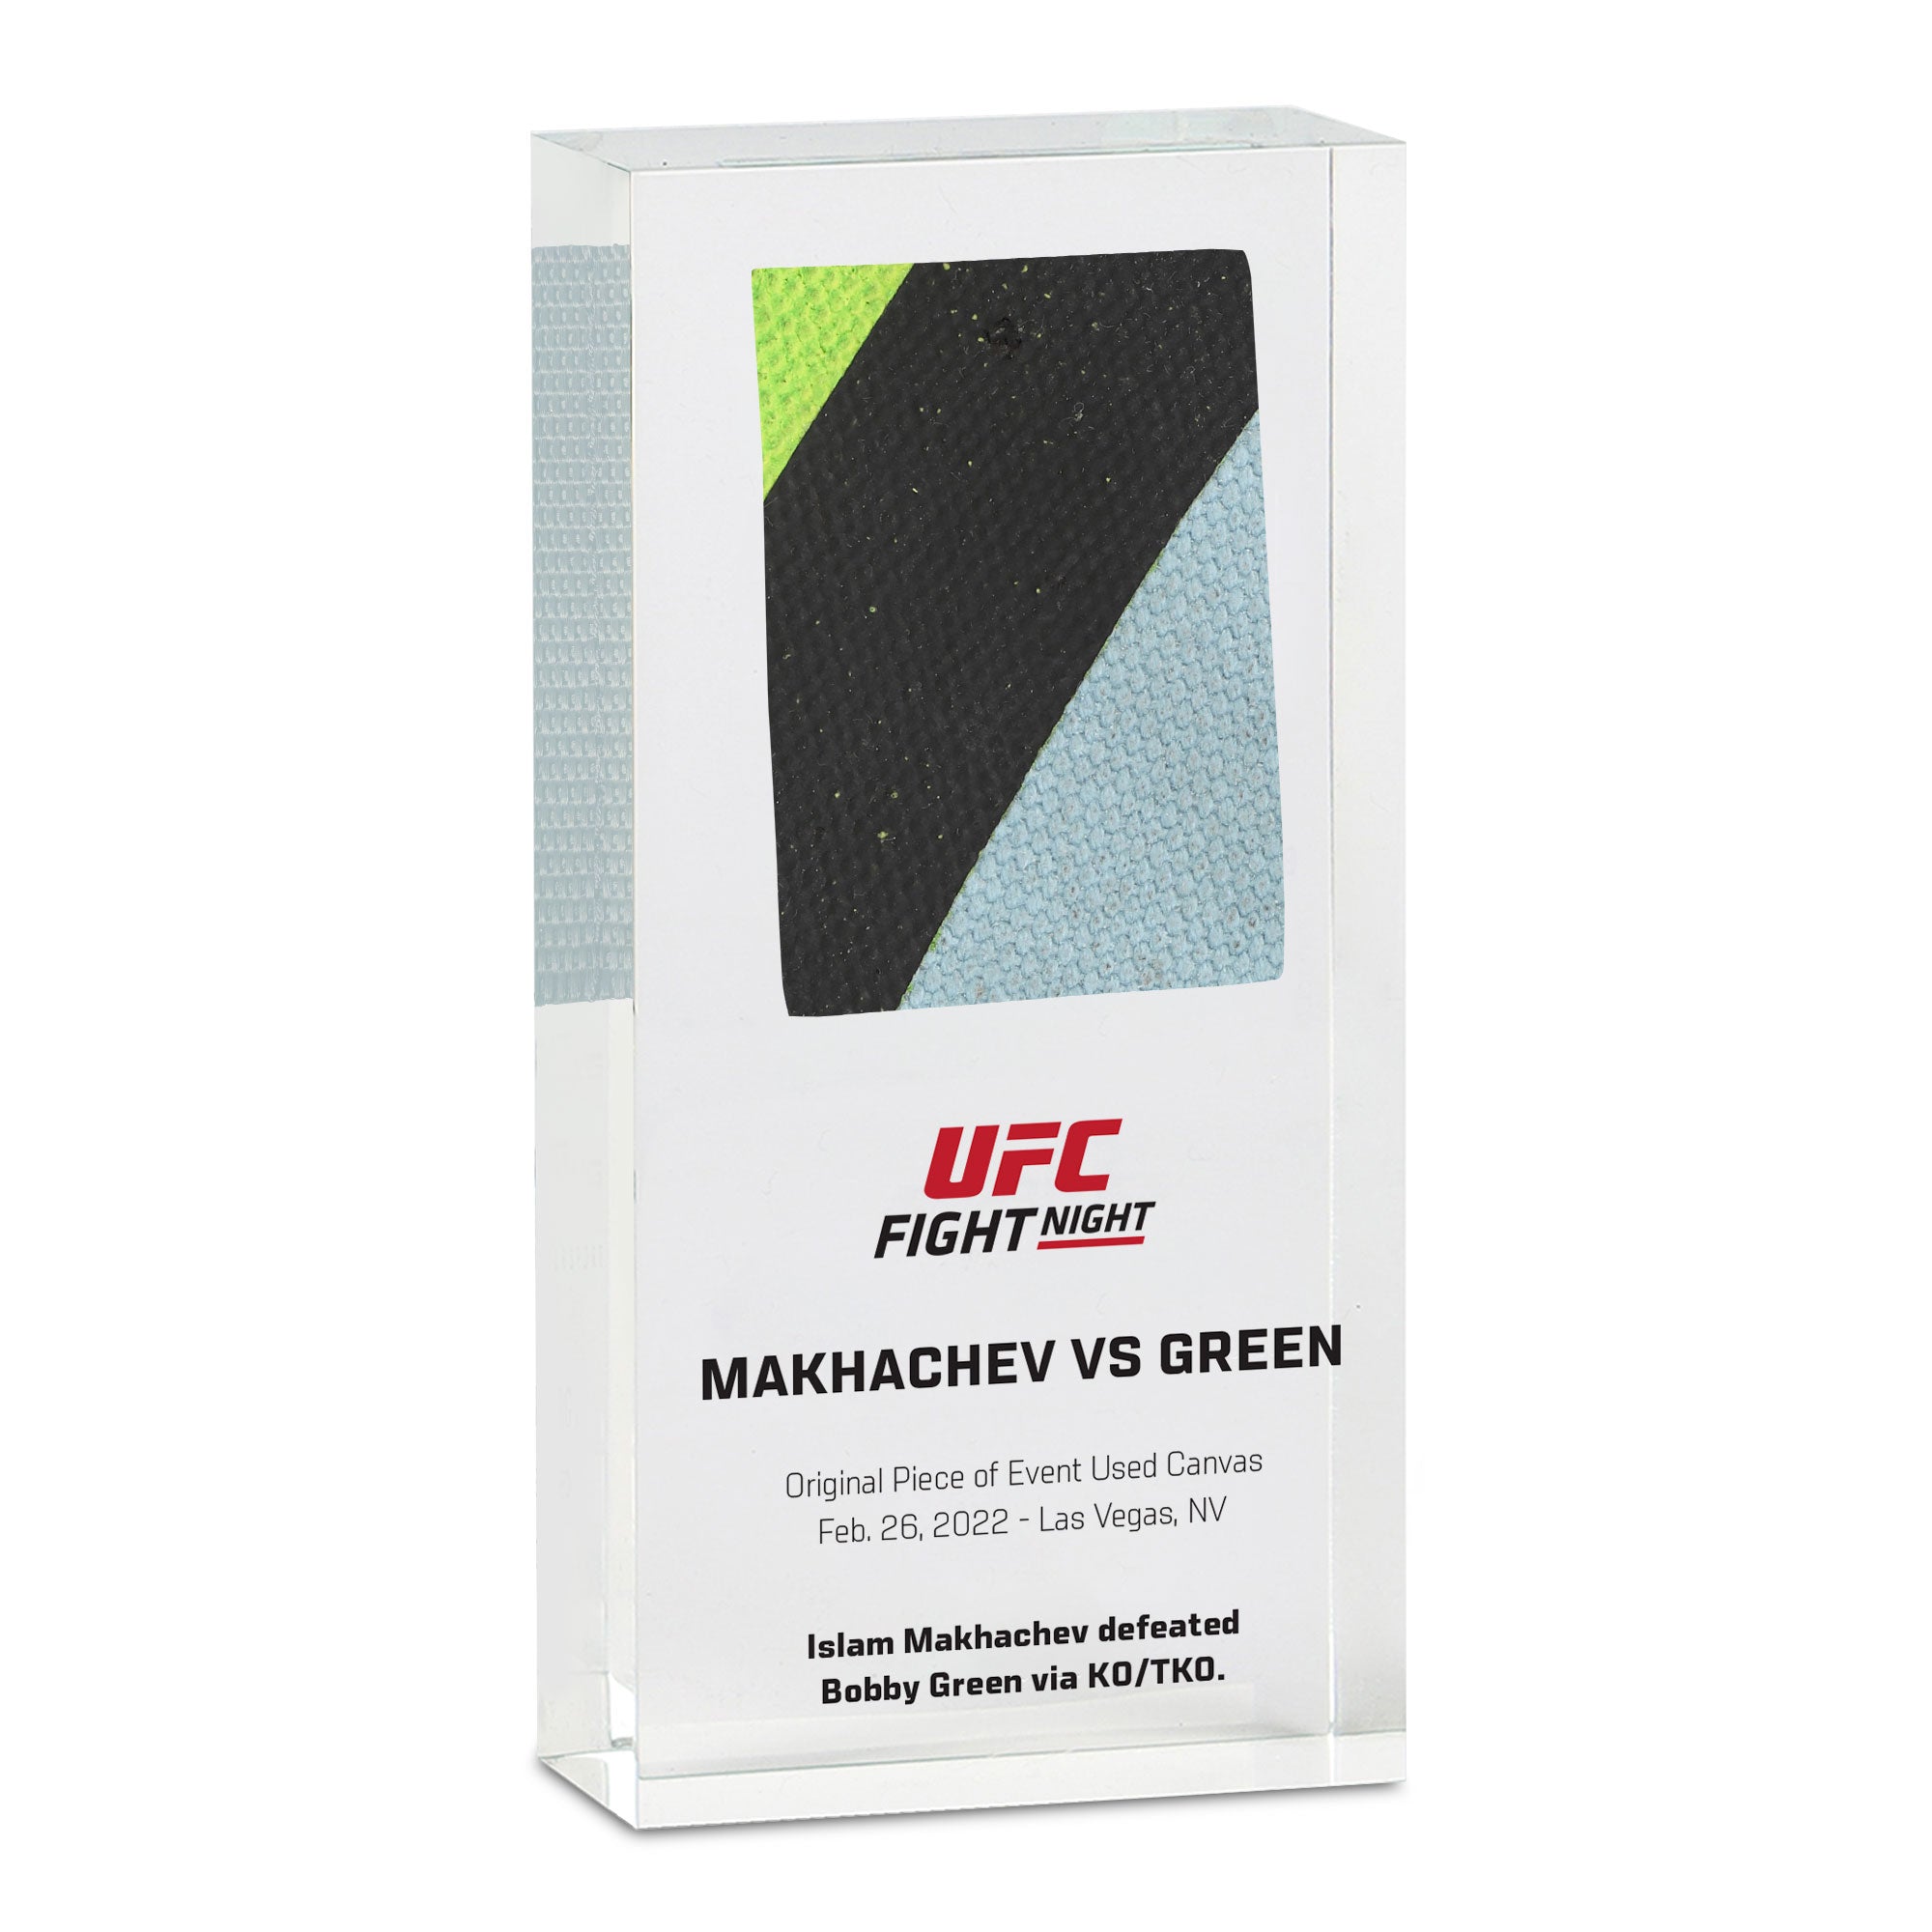 UFC Fight Night: Makhachev vs Green 2022 Canvas in Acrylic